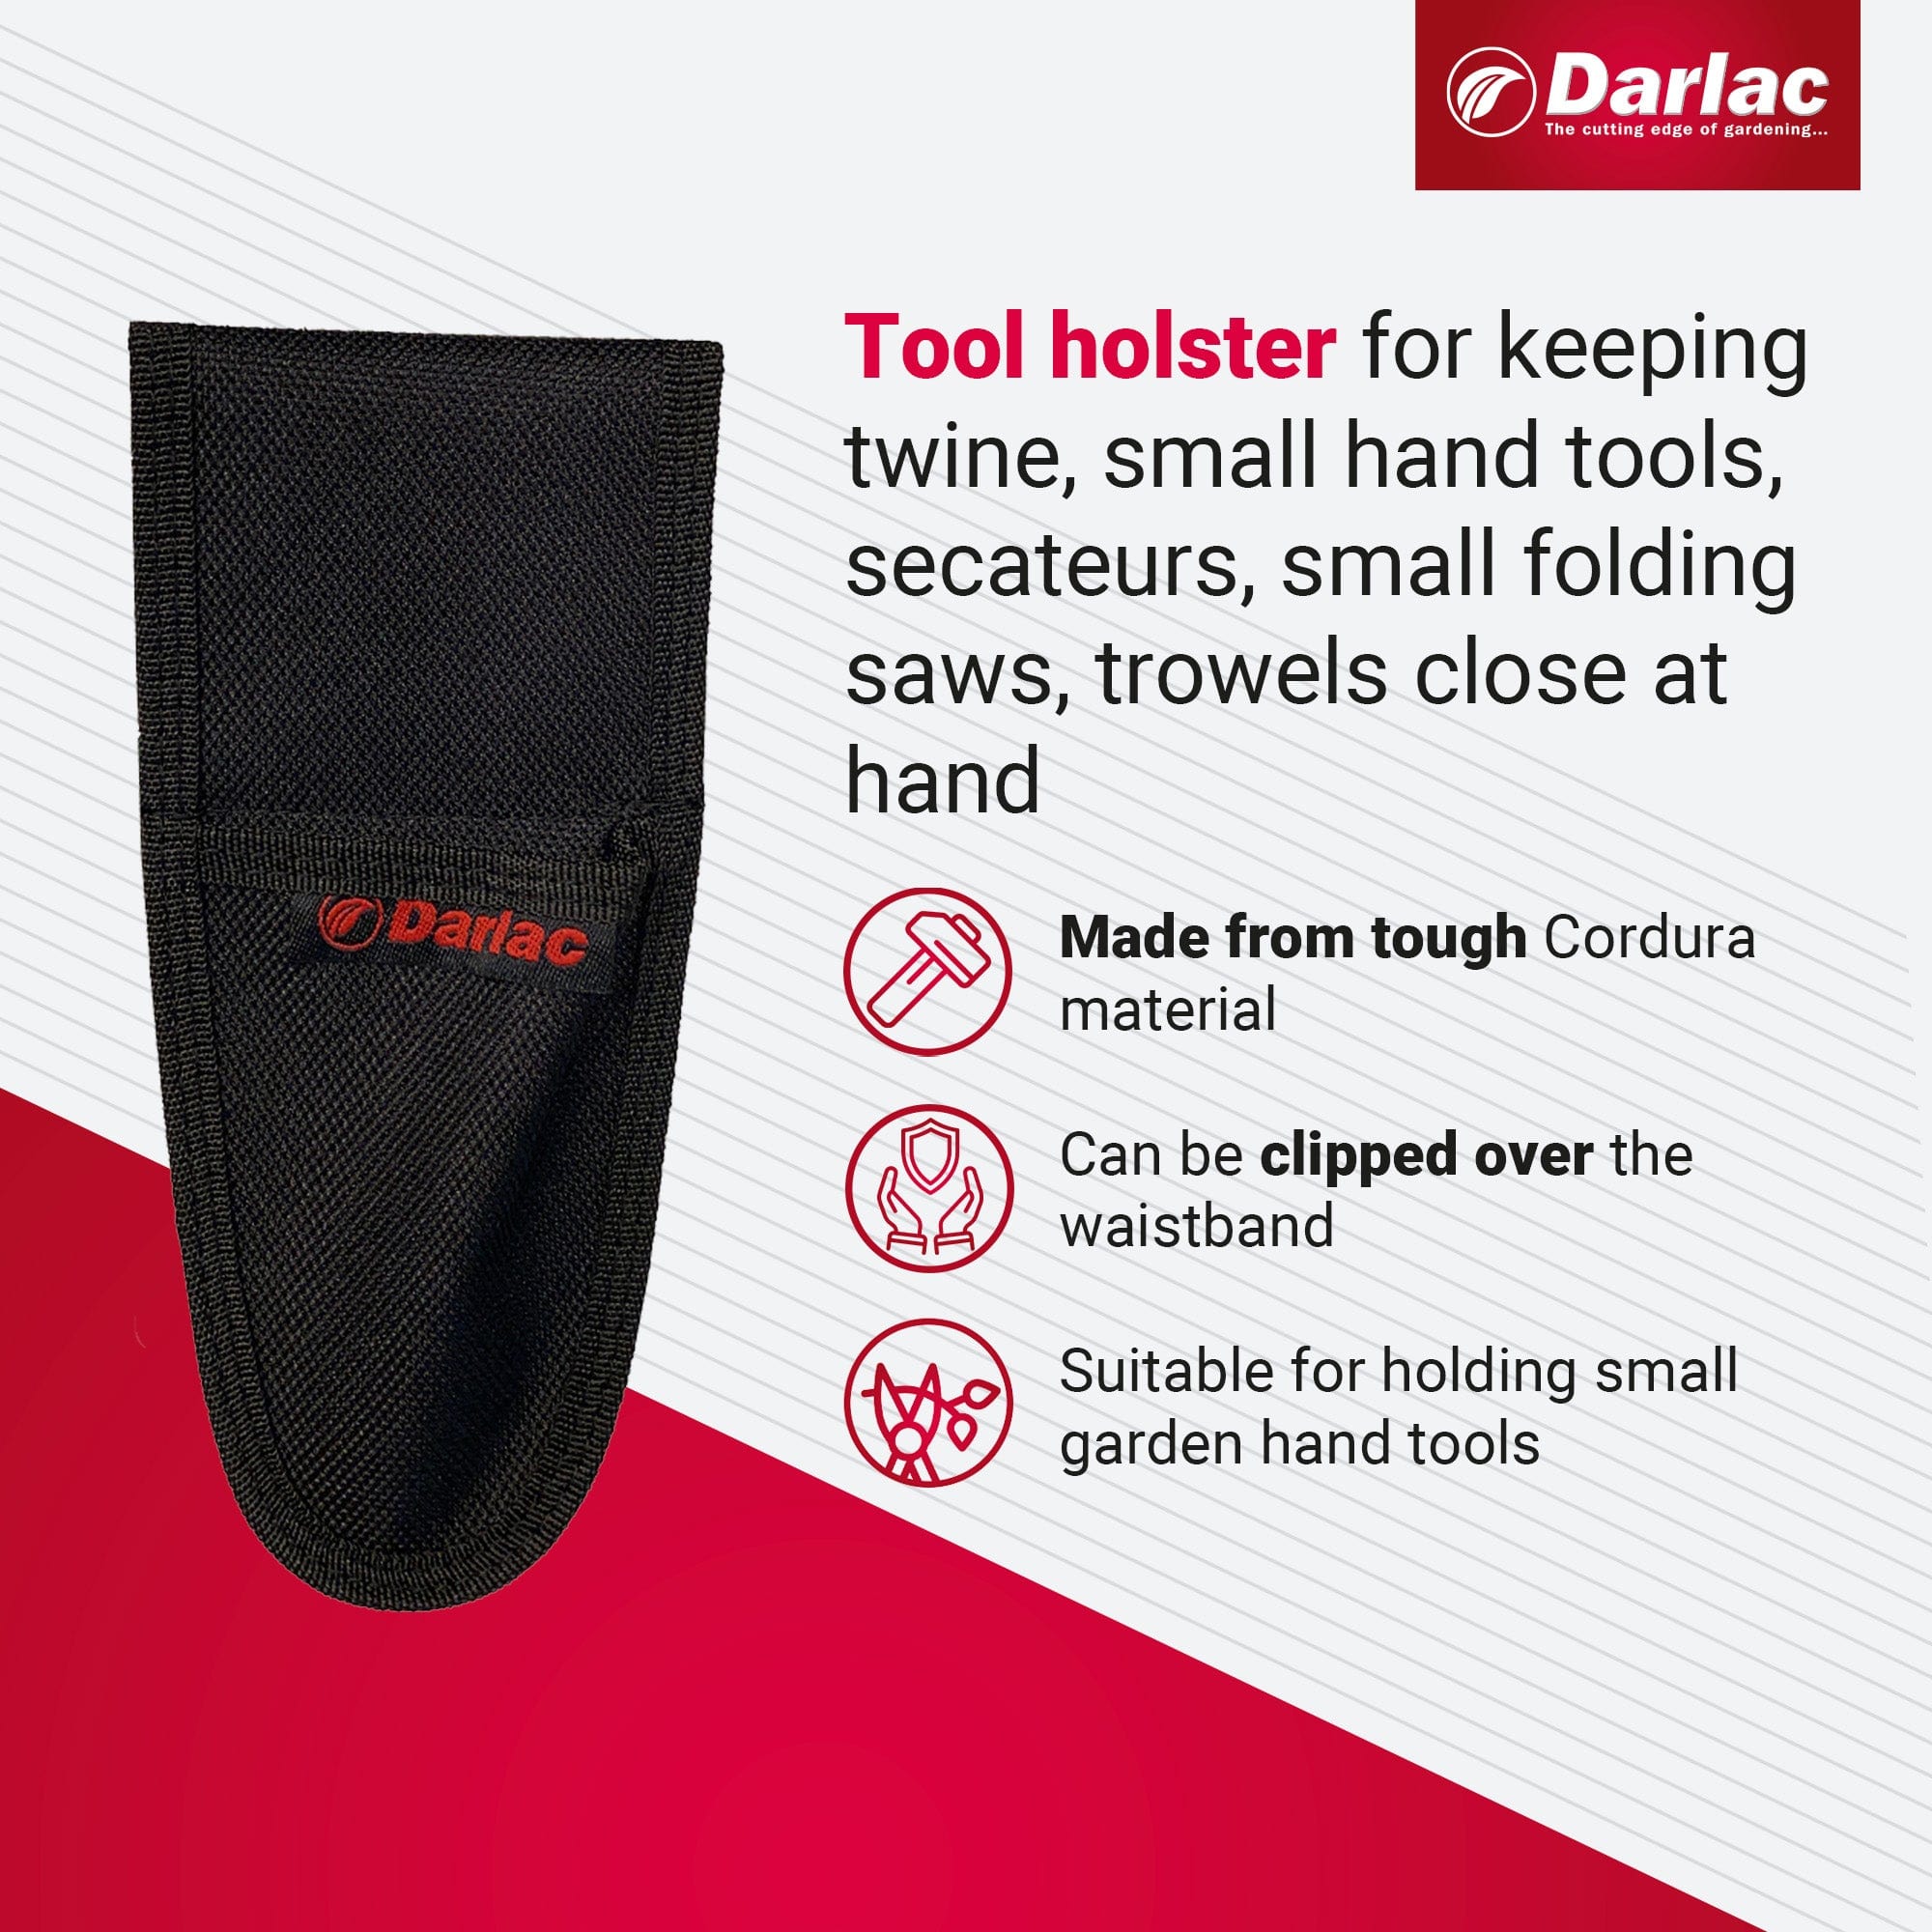 dt-brown HARDWARE Darlac Tool Holster